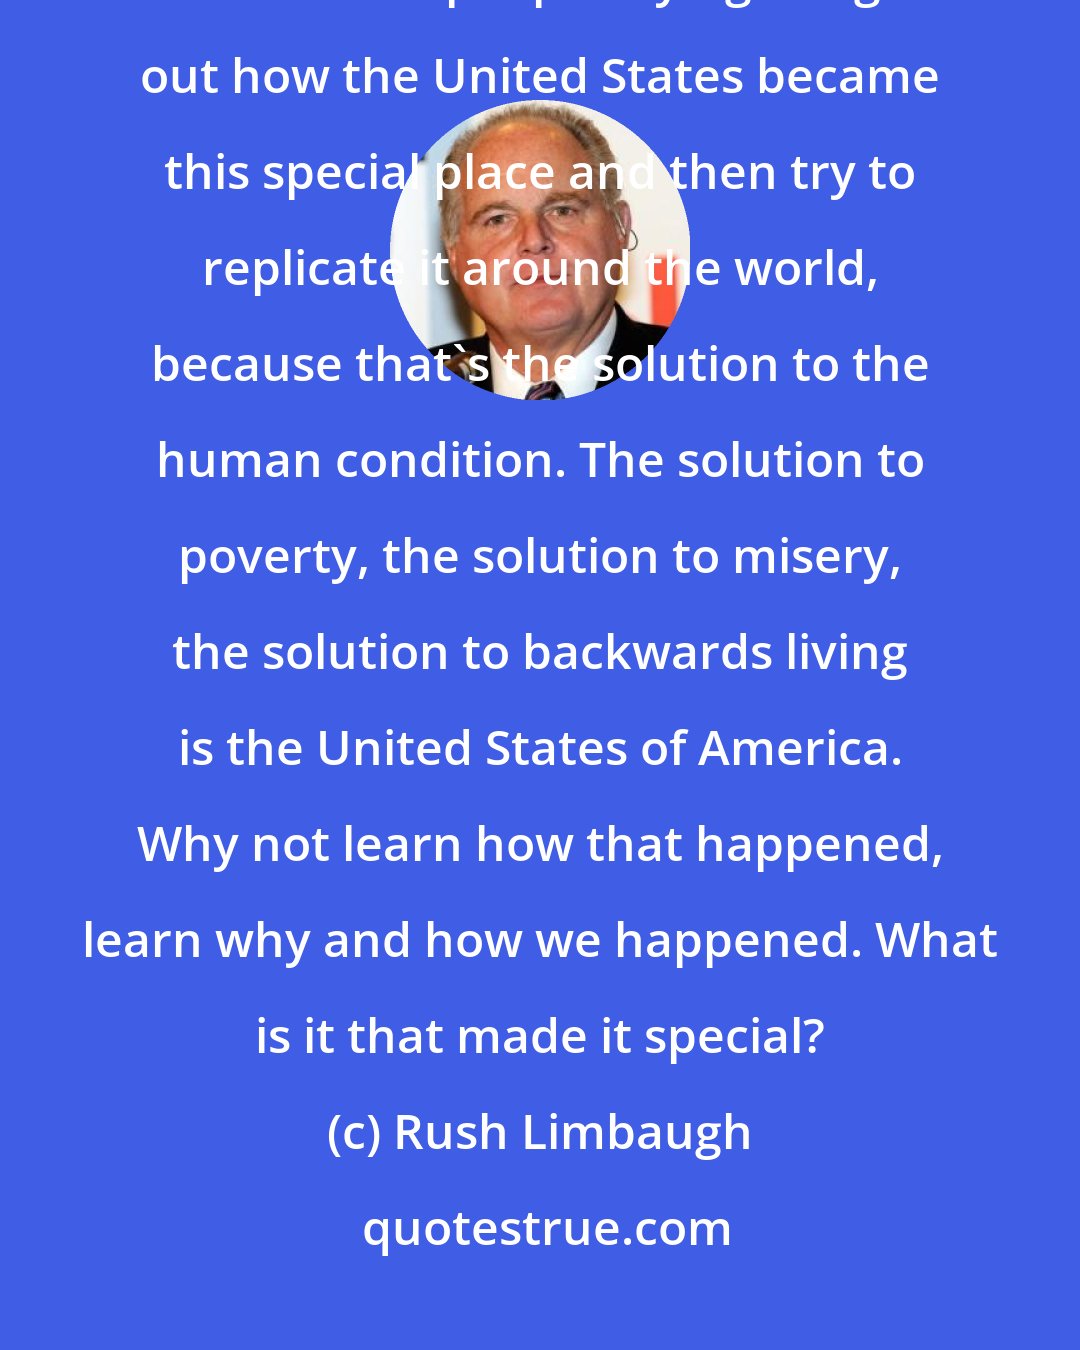 Rush Limbaugh: Common sense, to me, is simple. And I've never understood why there aren't a lot of people trying to figure out how the United States became this special place and then try to replicate it around the world, because that's the solution to the human condition. The solution to poverty, the solution to misery, the solution to backwards living is the United States of America. Why not learn how that happened, learn why and how we happened. What is it that made it special?